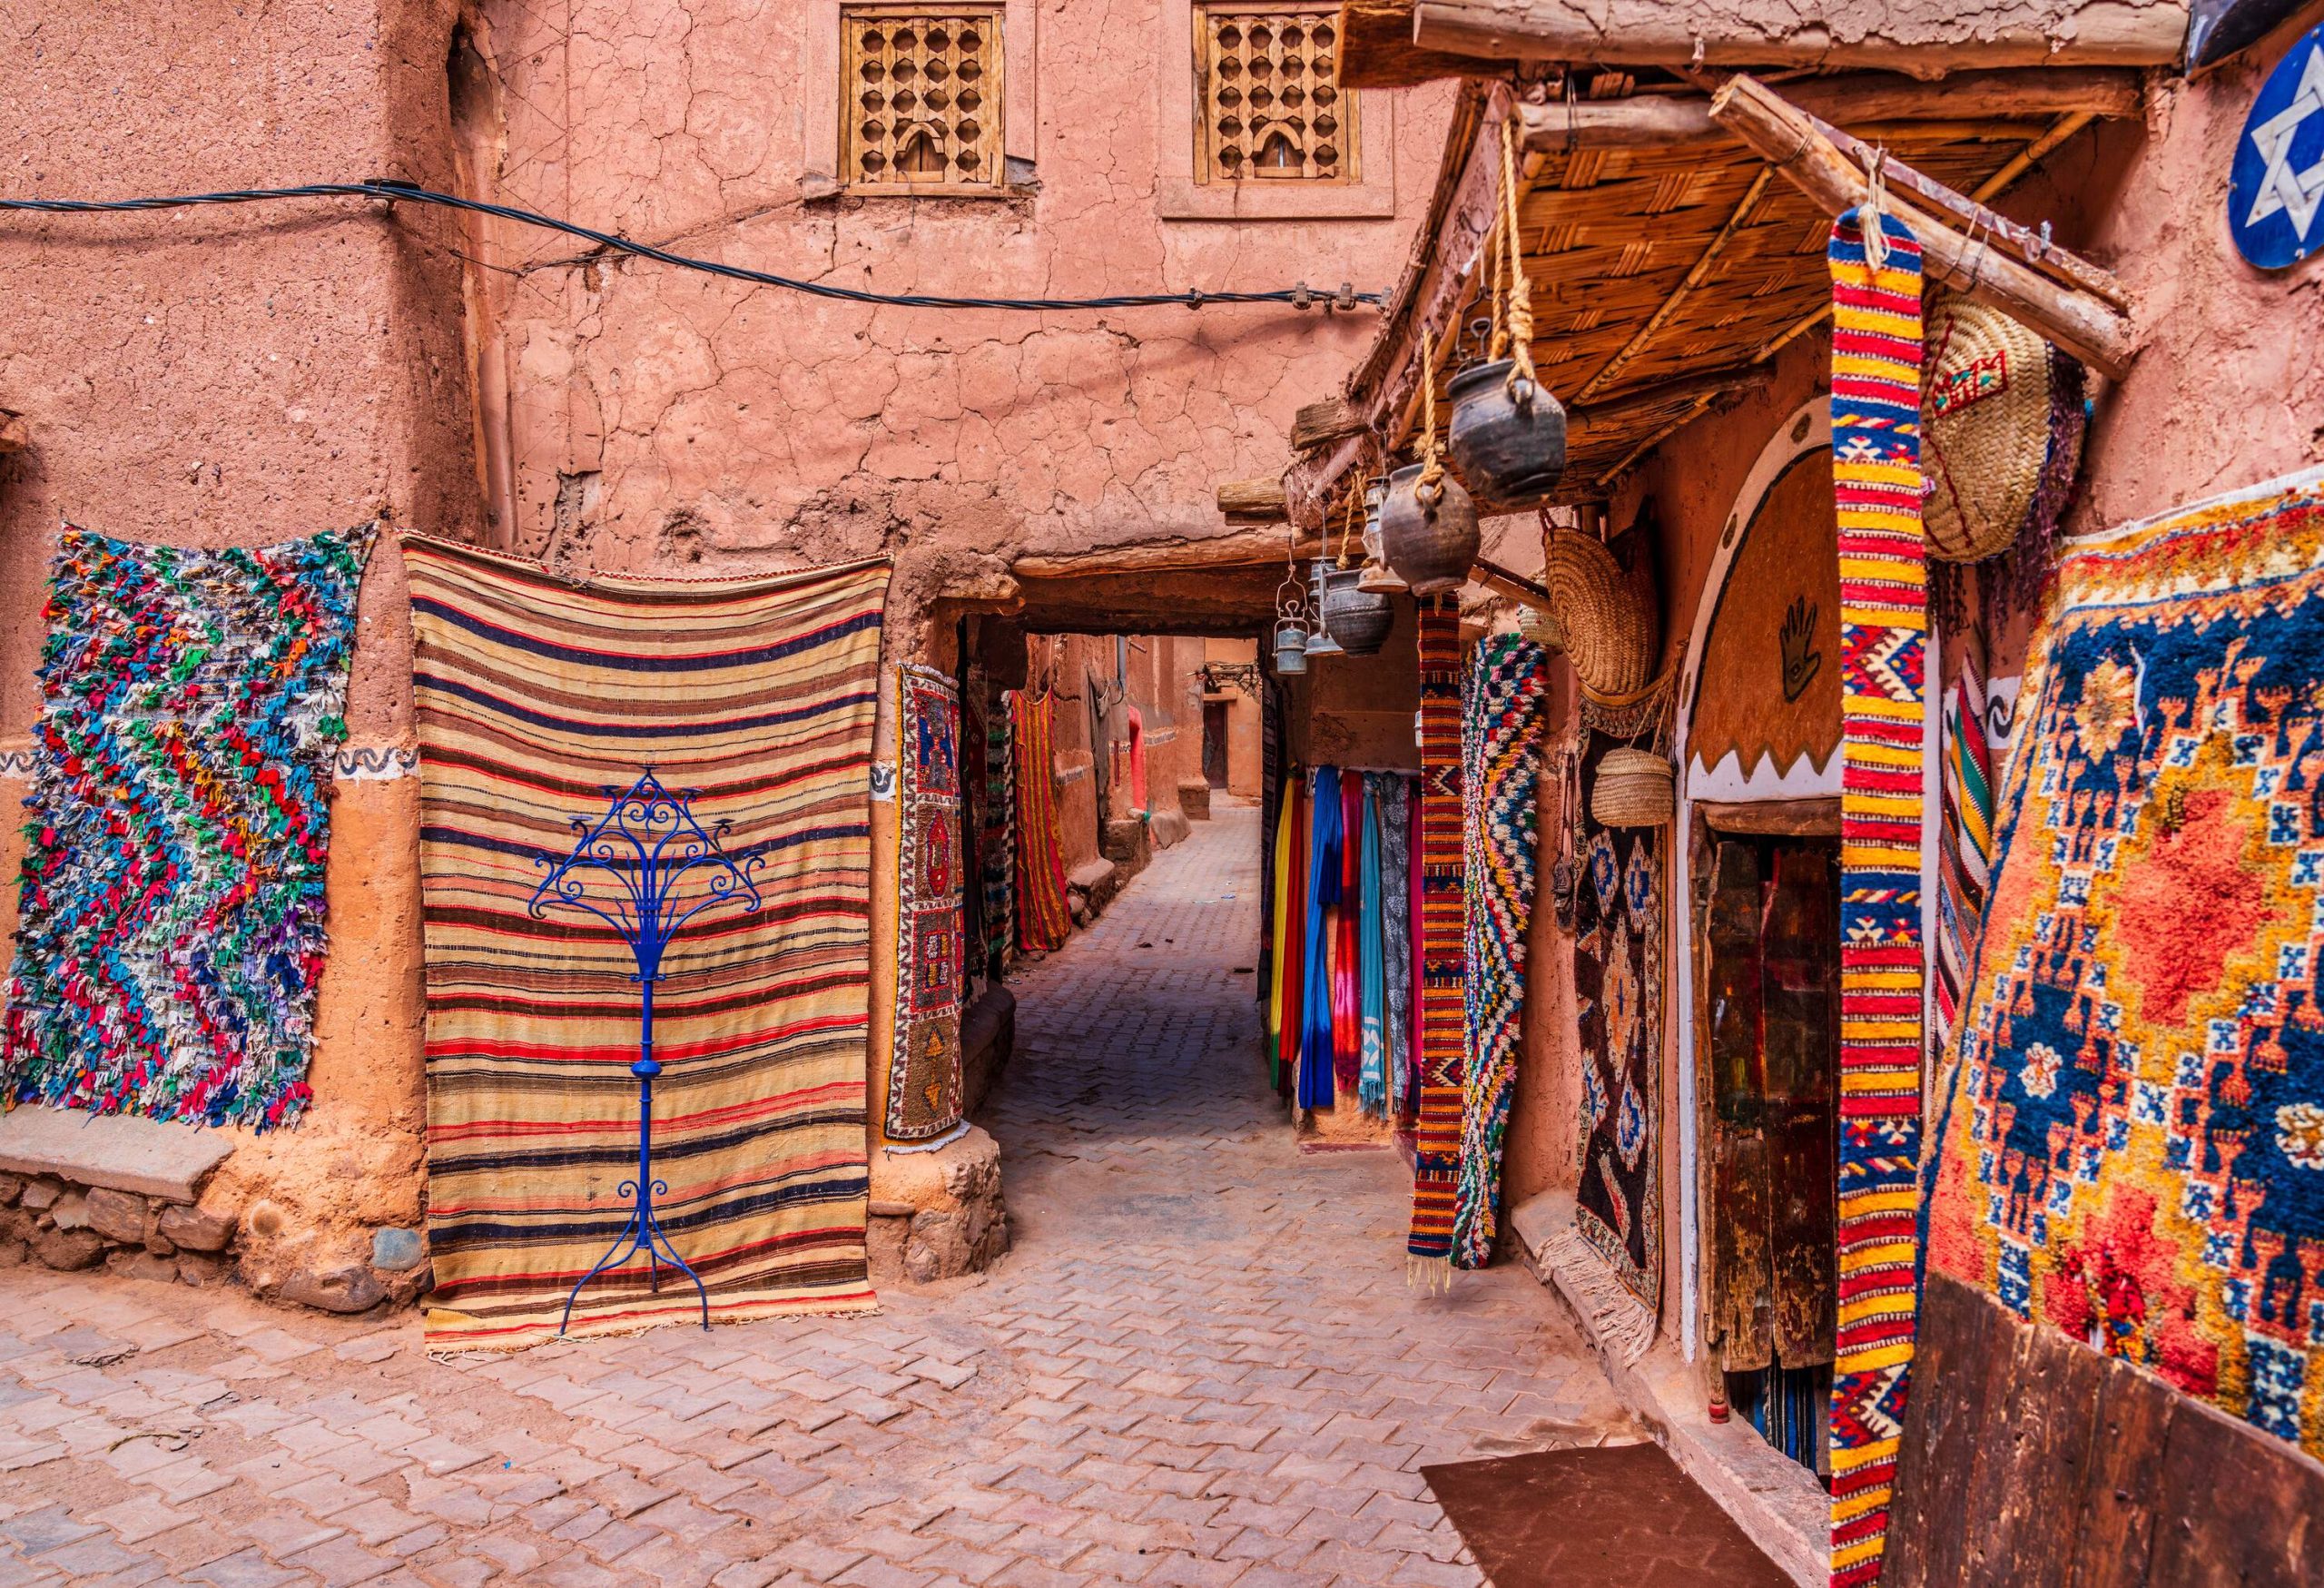 A narrow street inside a compound with colourful handmade carpets and rugs hanging outside the traditional houses.